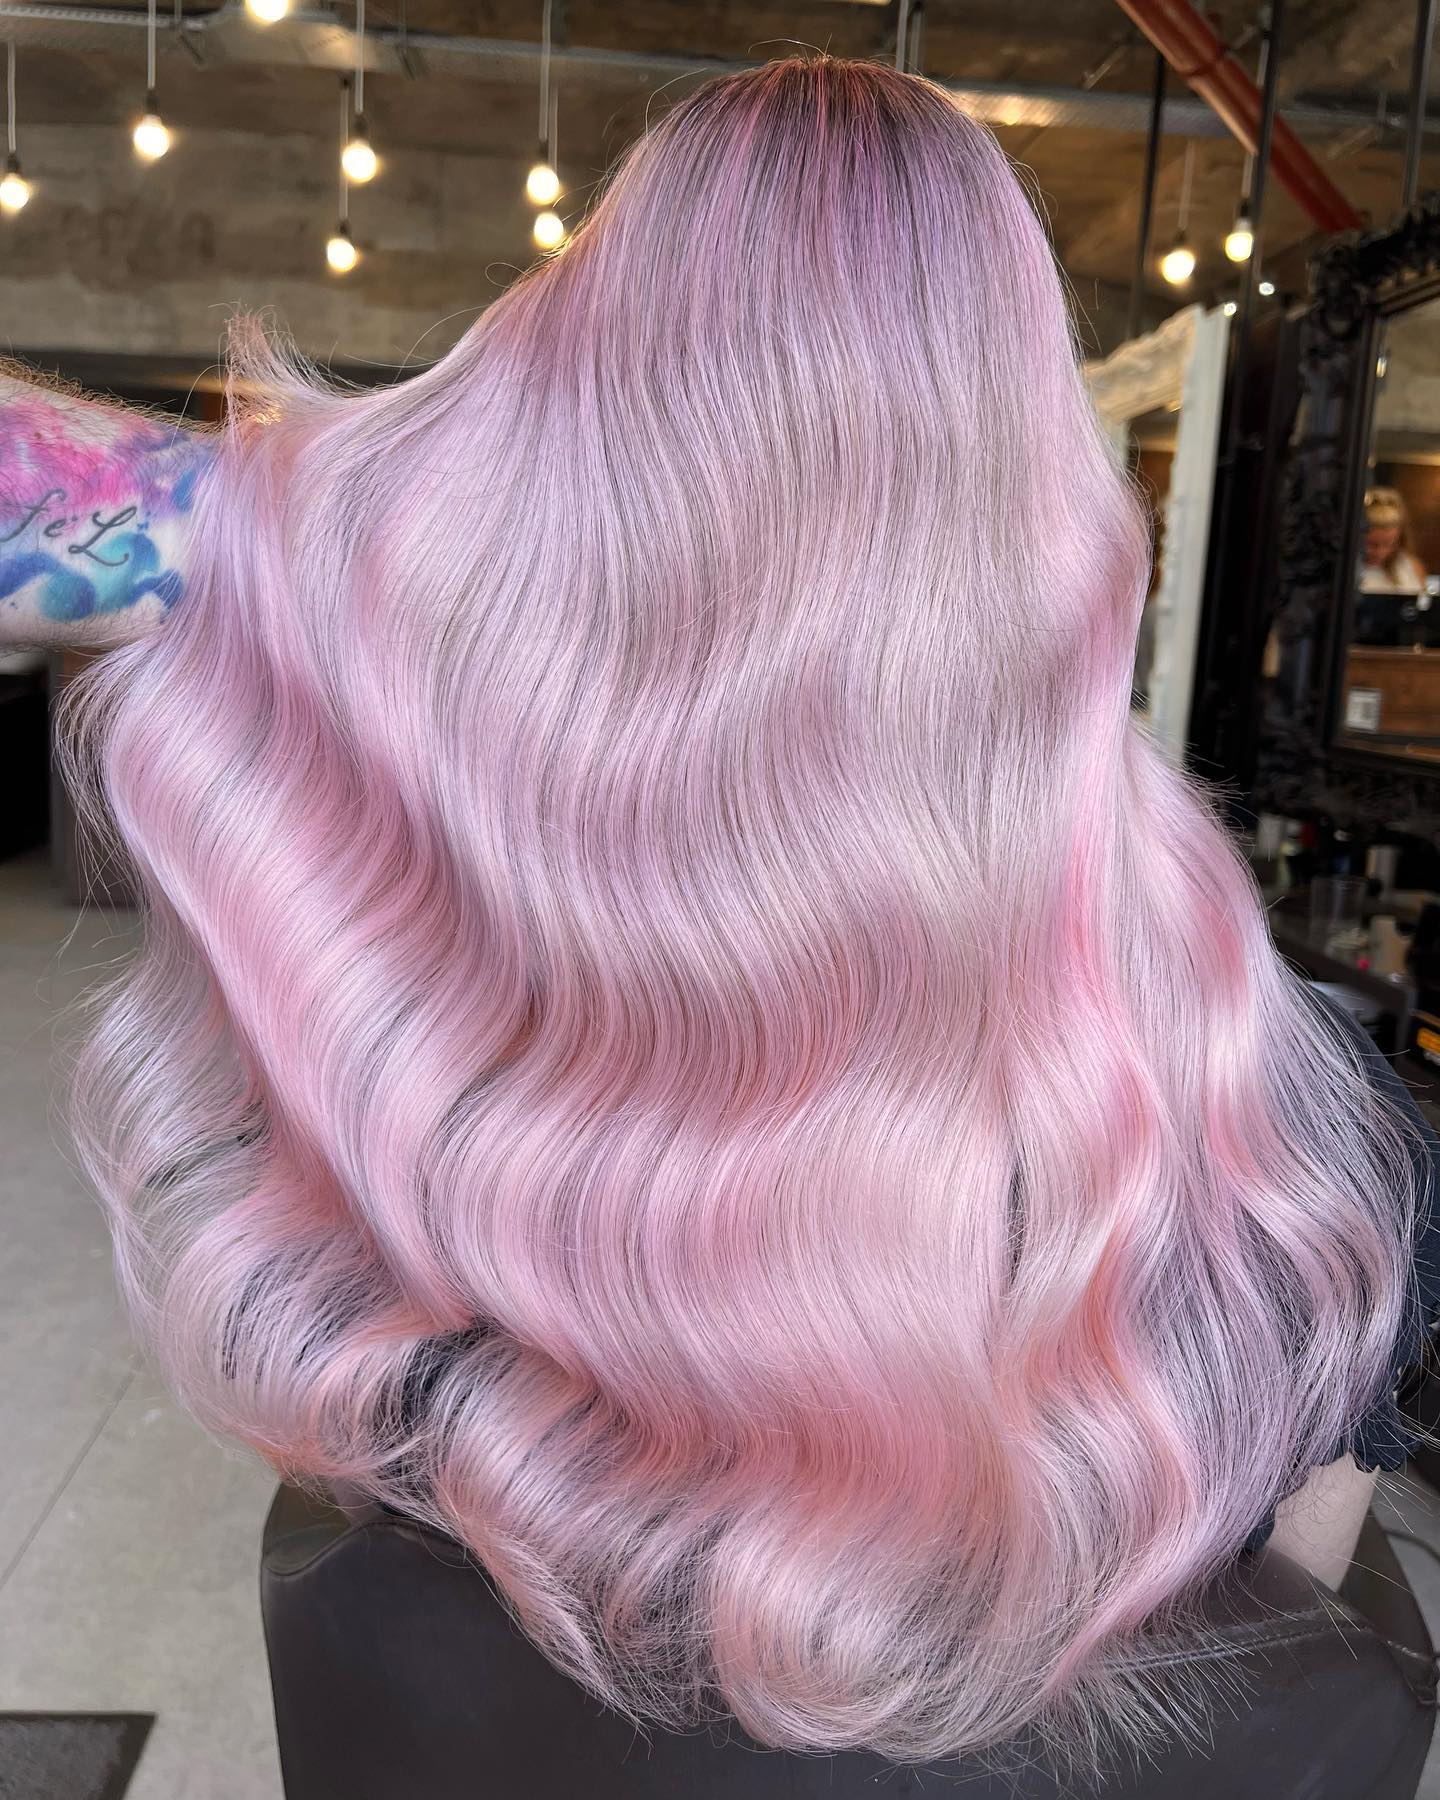 Baby Pink Color on Long Straight Hair